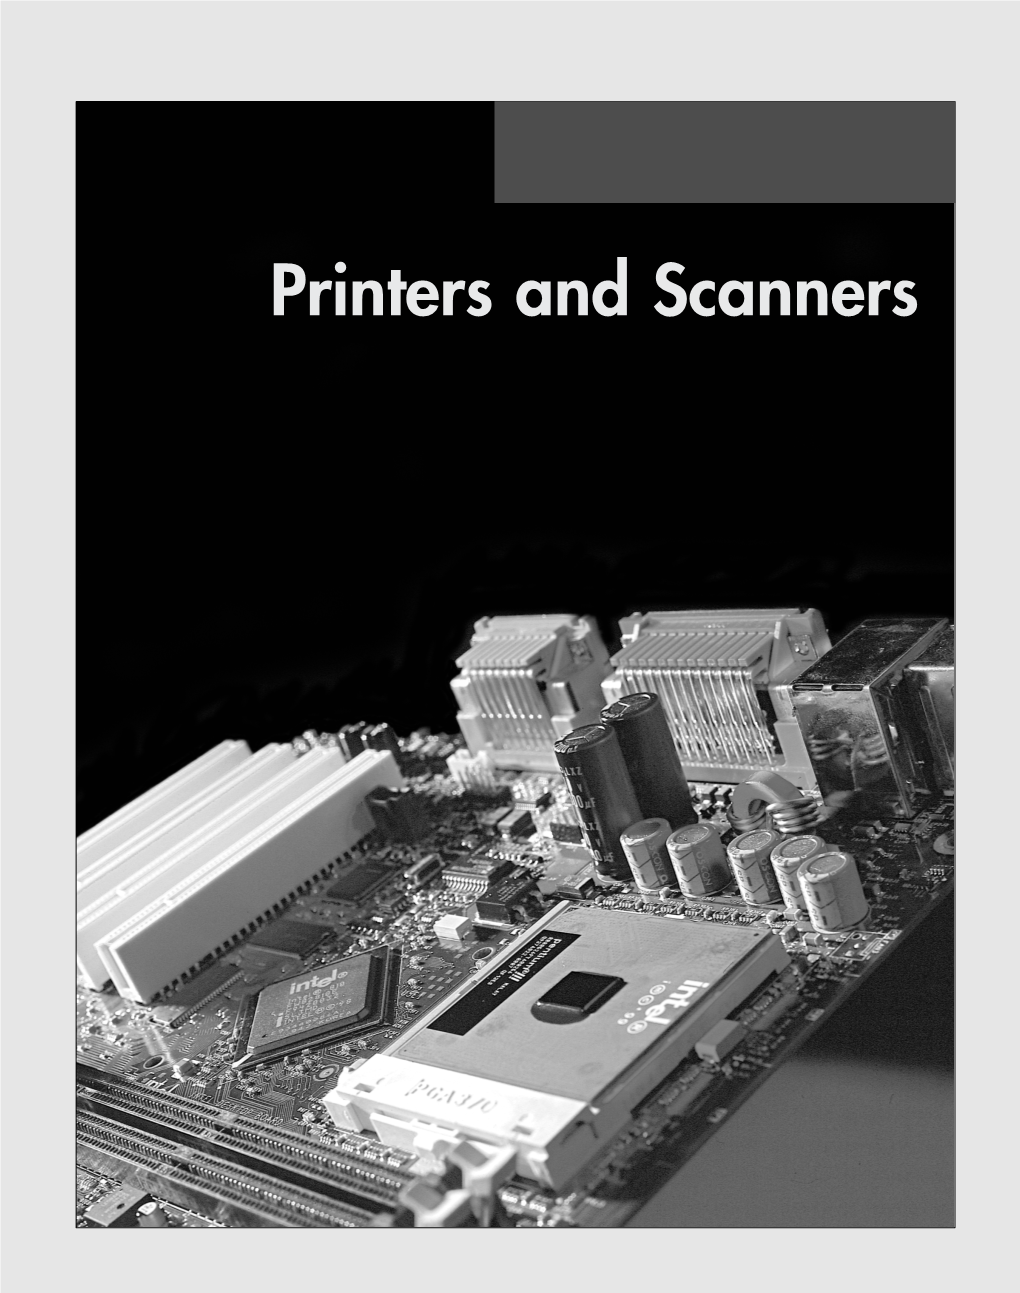 Printers and Scanners 2